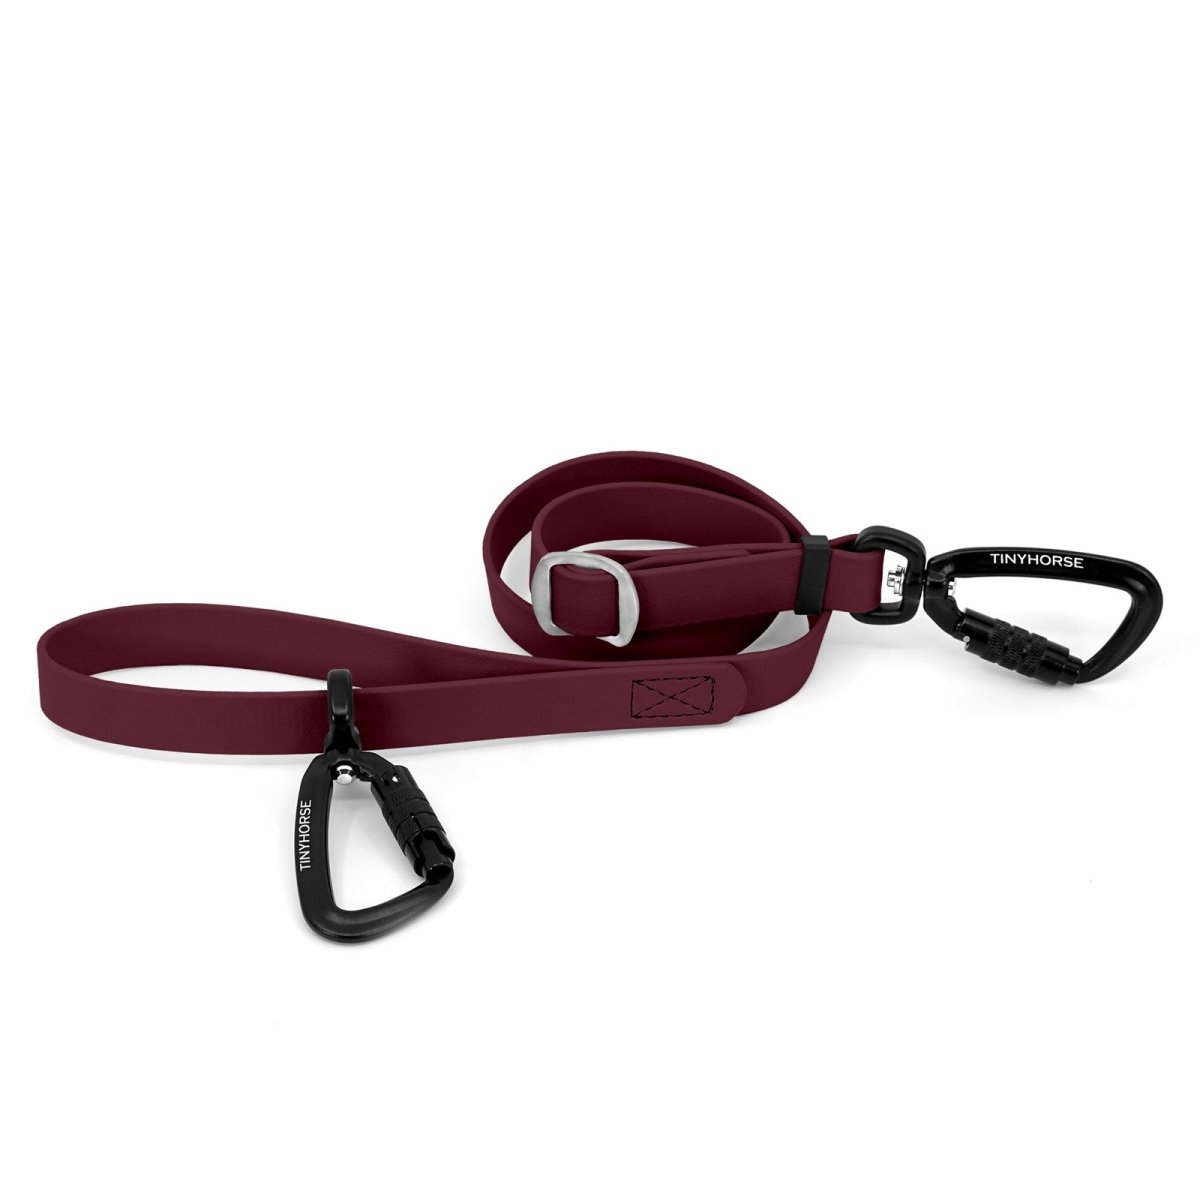 An adjustable burgundy-coloured Lead-All Pro made of BioThane with 2 auto-locking carabiners